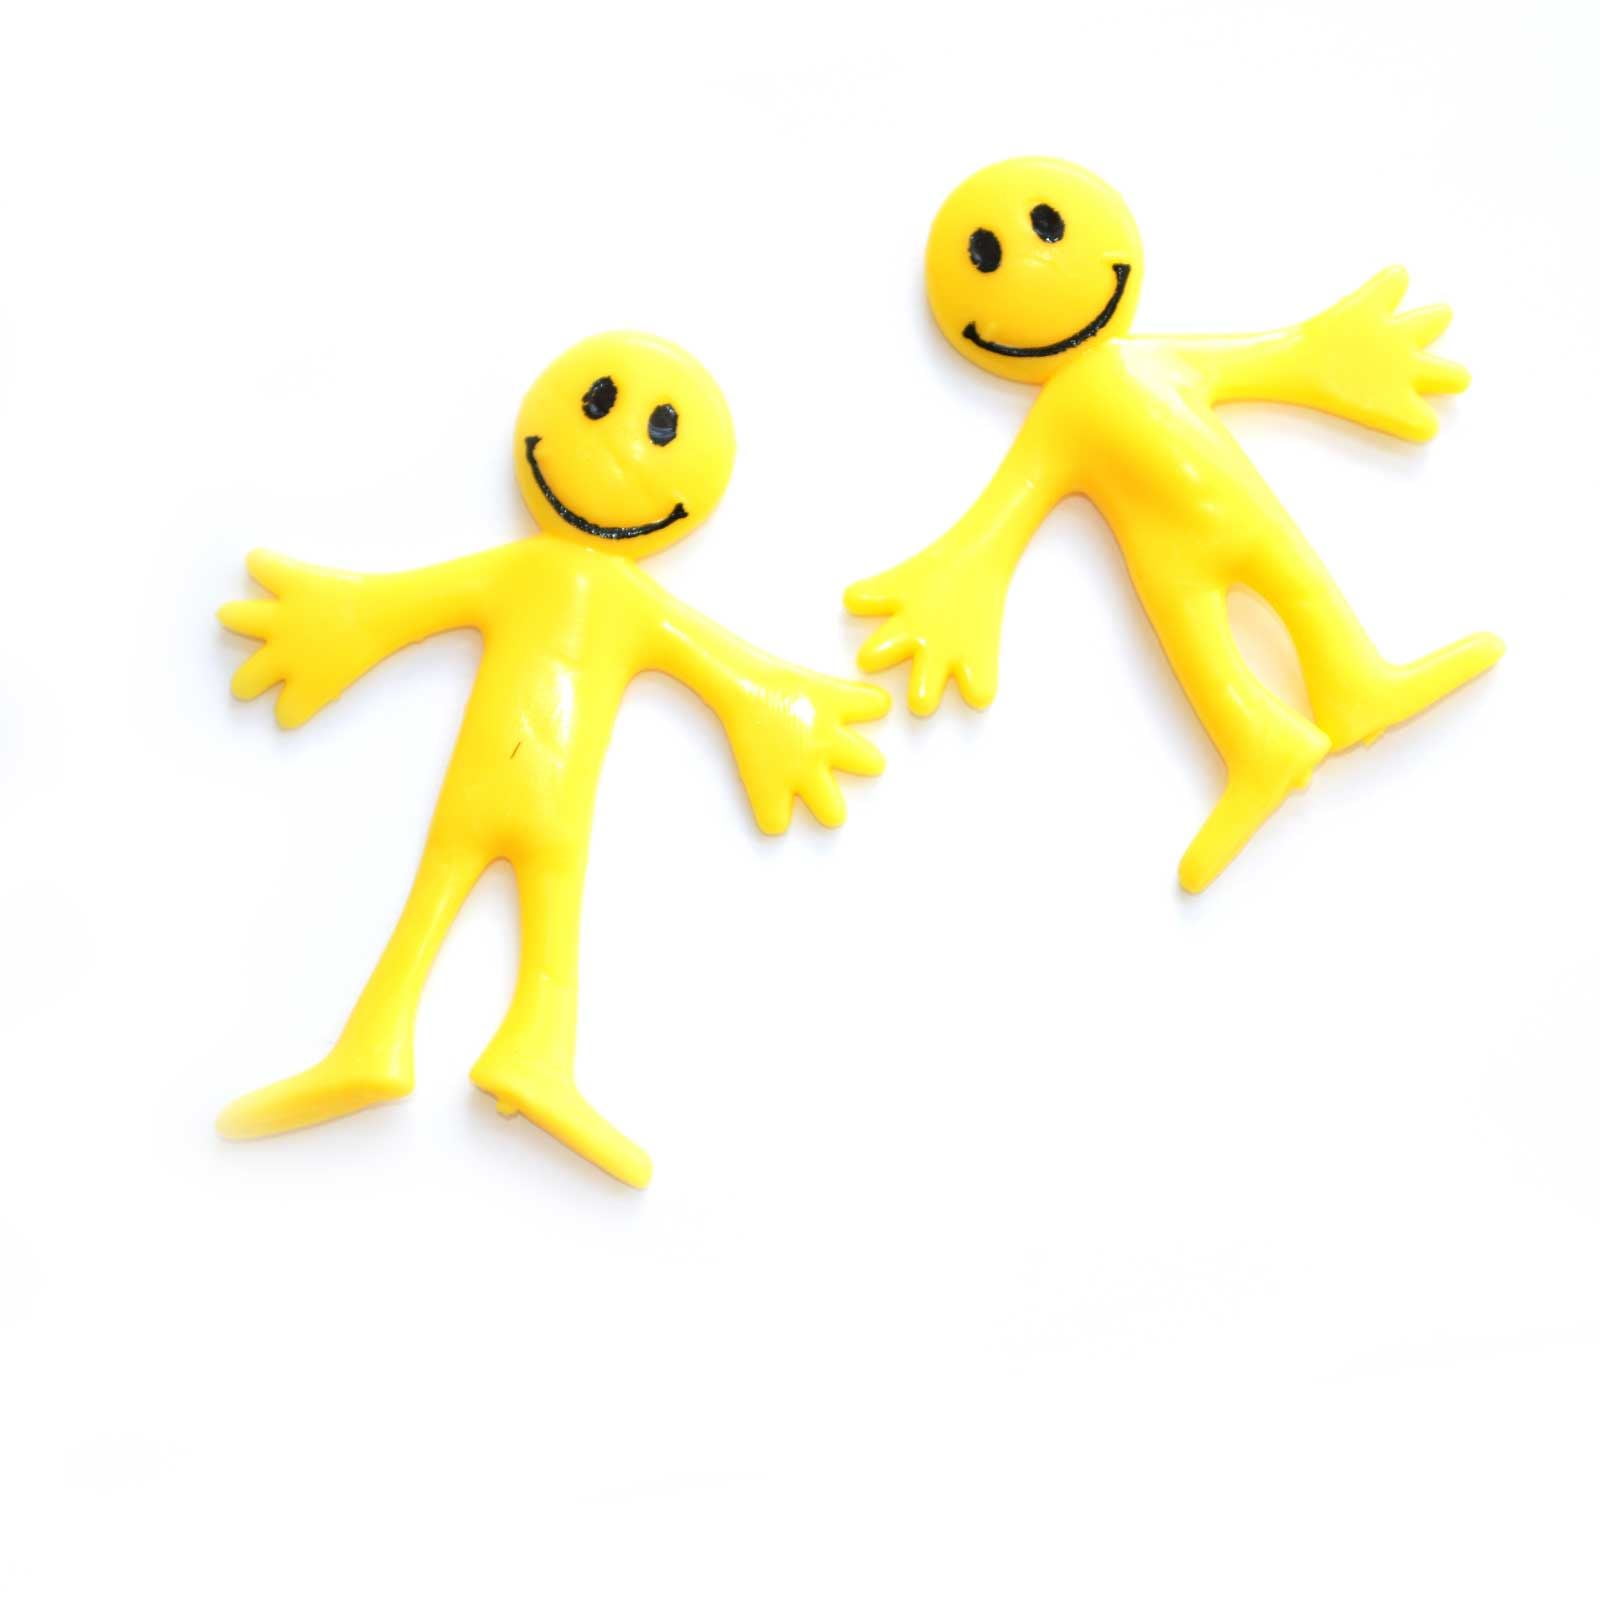 12 Stretchy Smiley Men Yellow Toys Party Bags Fillers Goody Bag Lucky Dip Fun by Playwrite